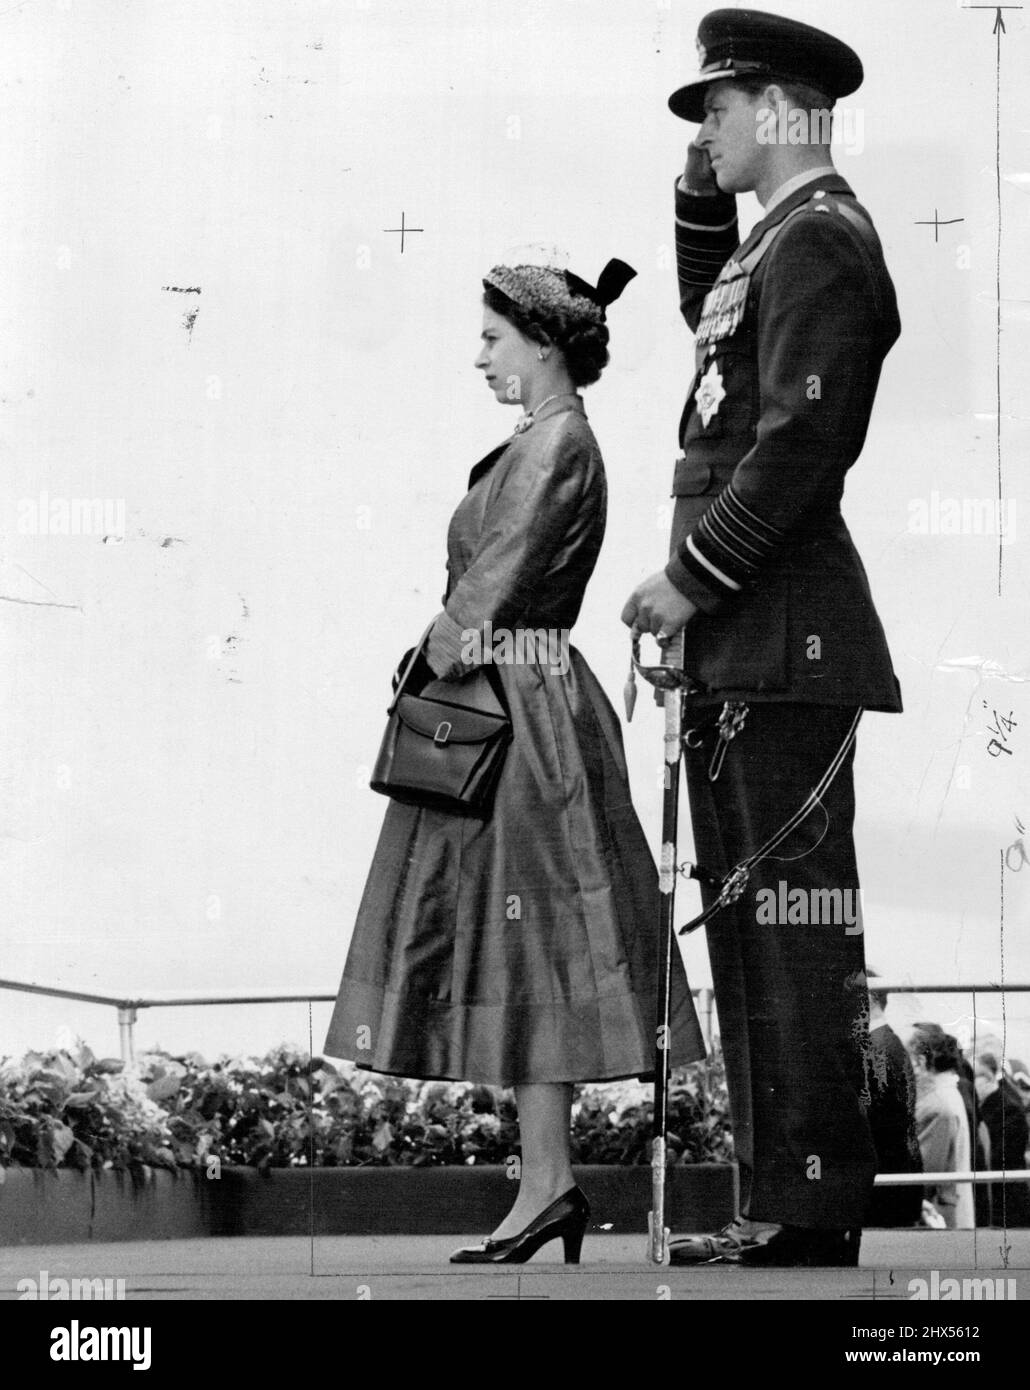 The Queen and Prince Philip photographed during the Royal Air Force Review held at Odiham, Hants, today. The Queen photographed watching a Royal Air Force Review wearing a waisted coat in stiff shantung. It's a gay little straw hat with a perky, stiffened velvet bow. July 15, 1953. (Photo by Daily Mirror). Stock Photo